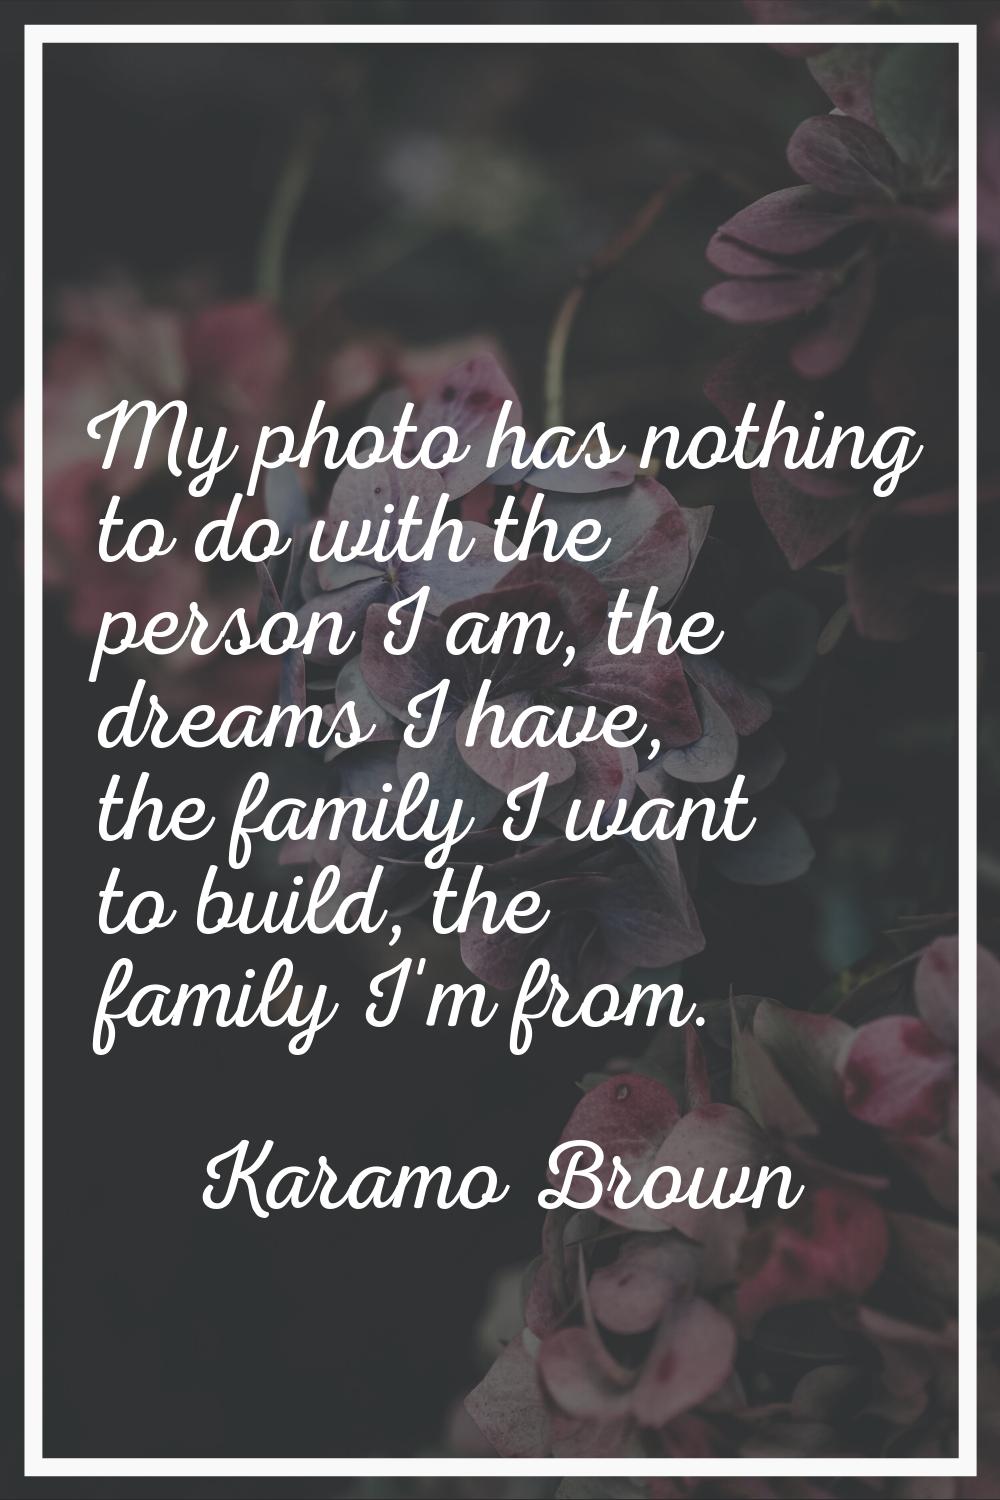 My photo has nothing to do with the person I am, the dreams I have, the family I want to build, the